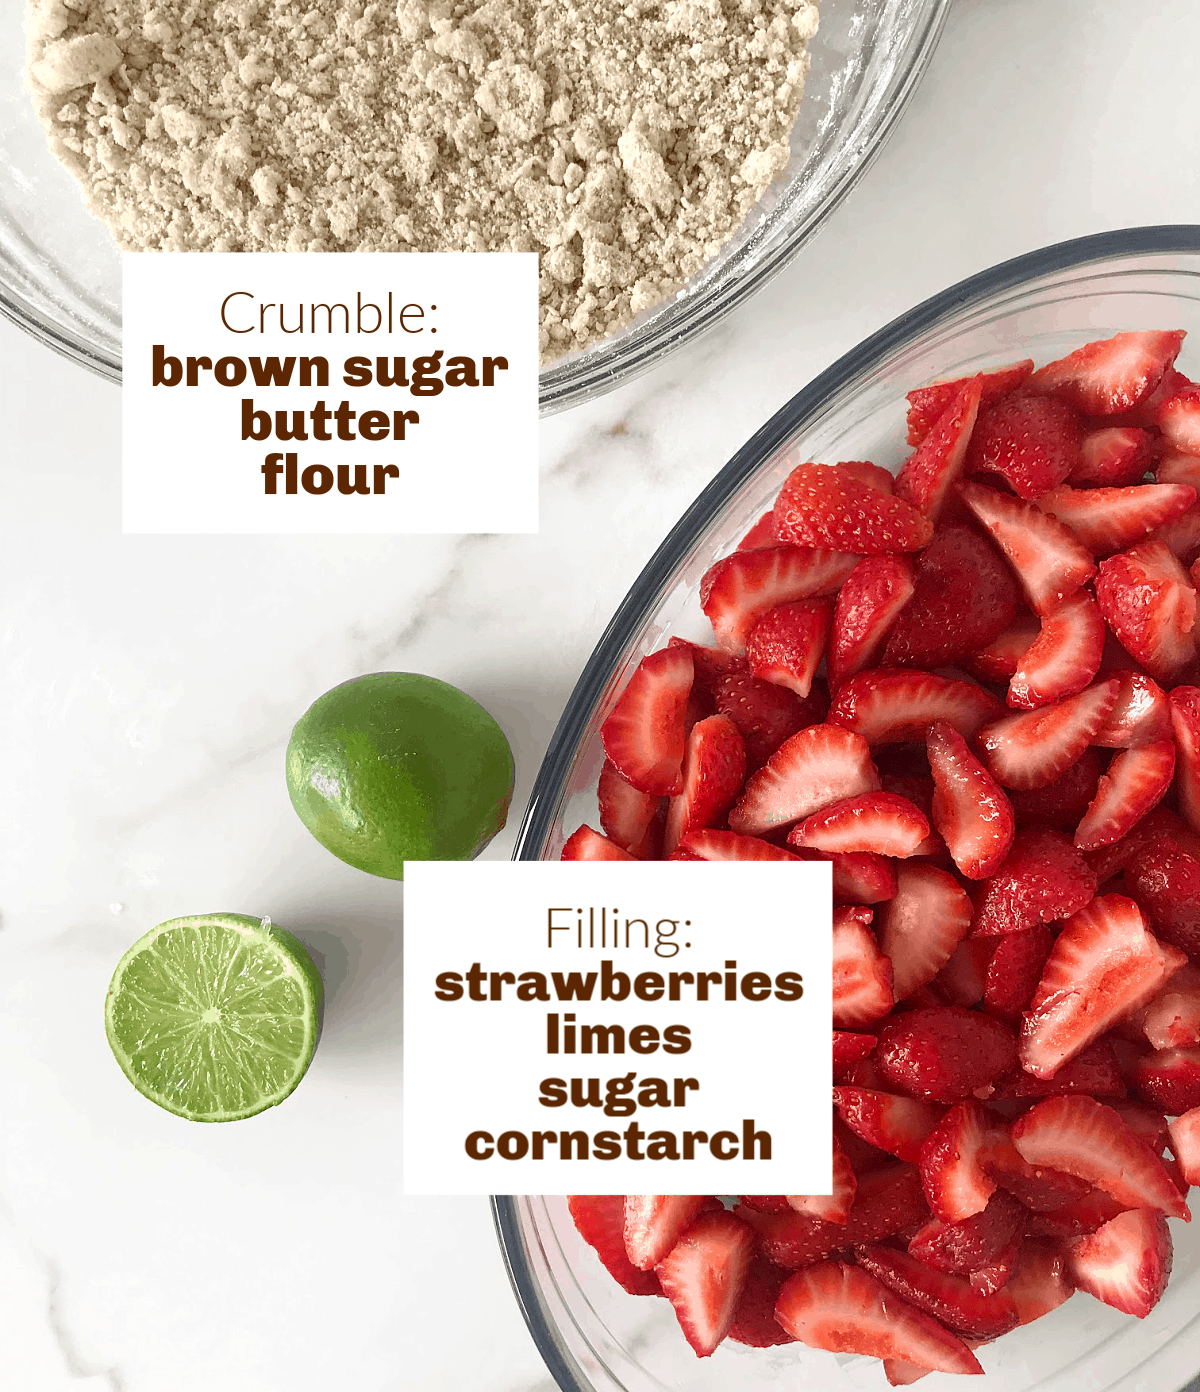 Image with text; limes, dish with strawberries, bowl with crumble